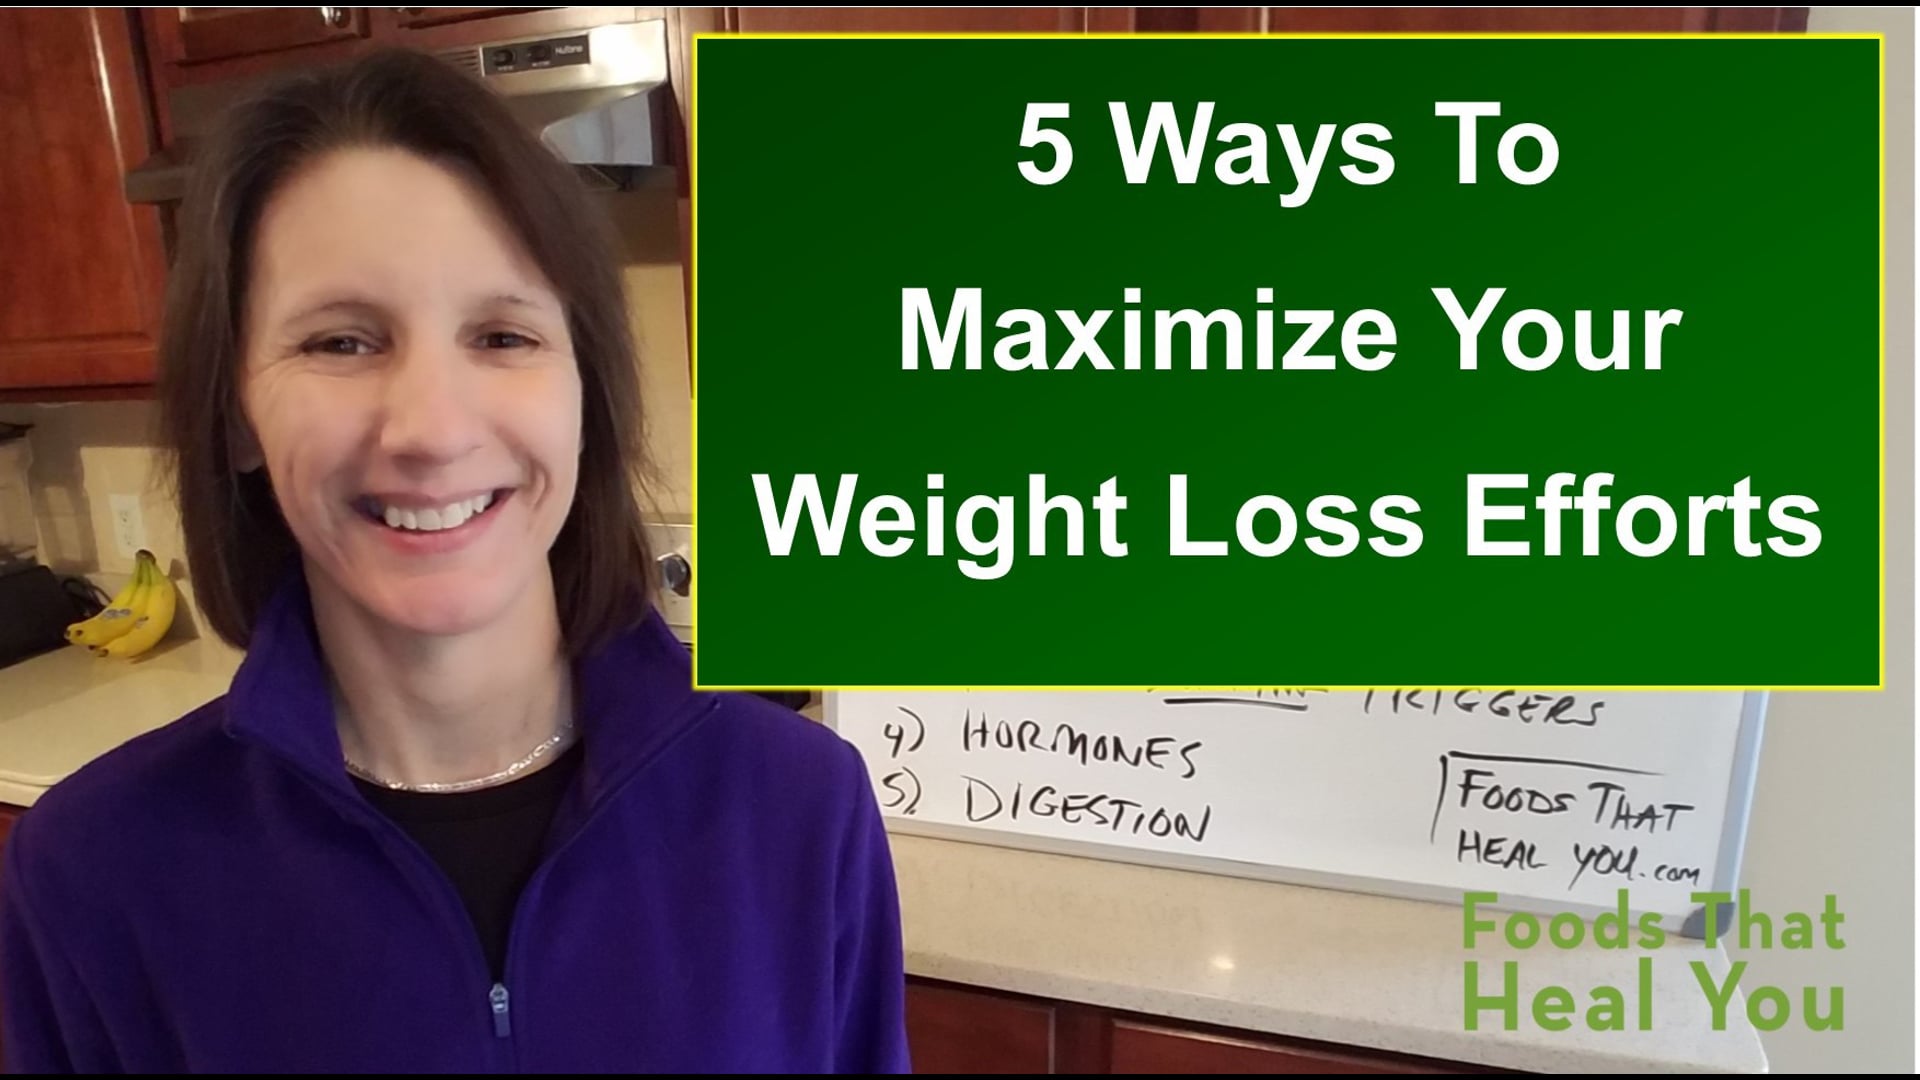 5 Tips For Healthy Weight Loss